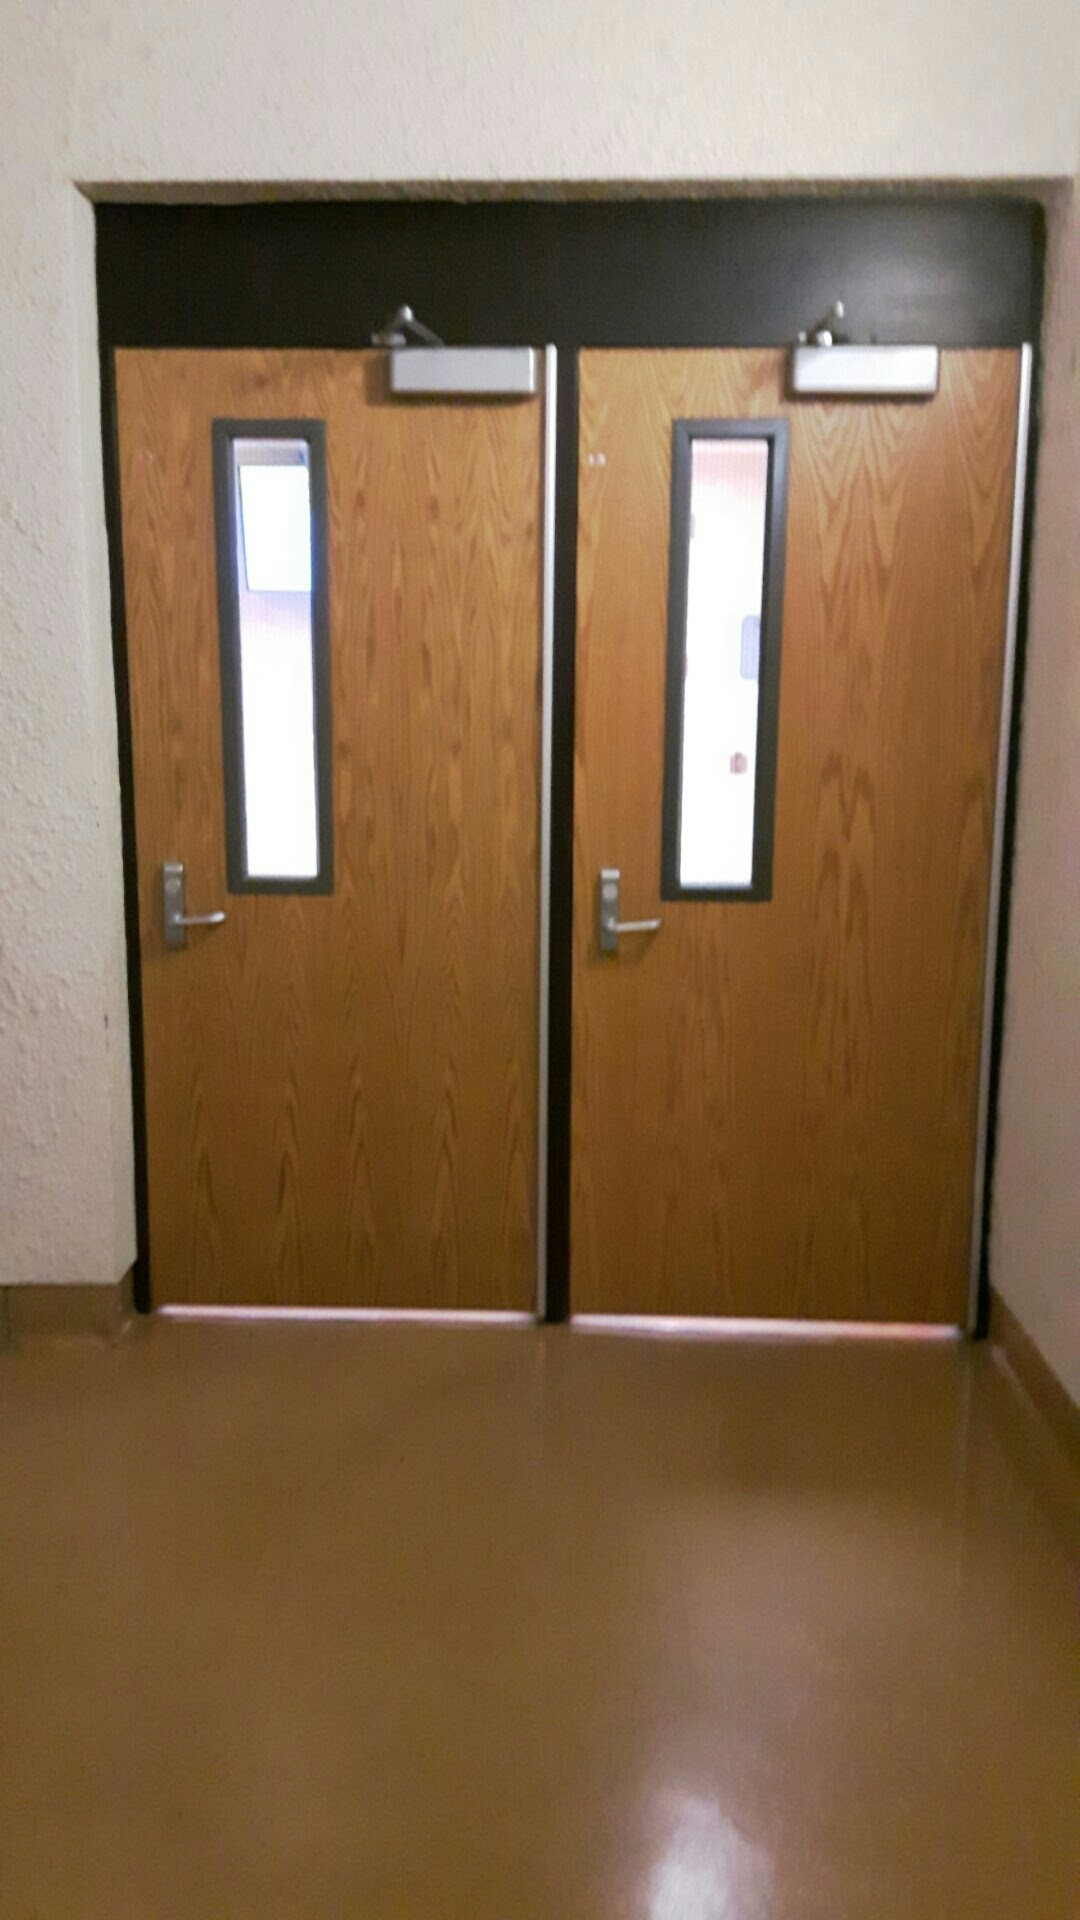 Double doors that one doesn't open the right way.